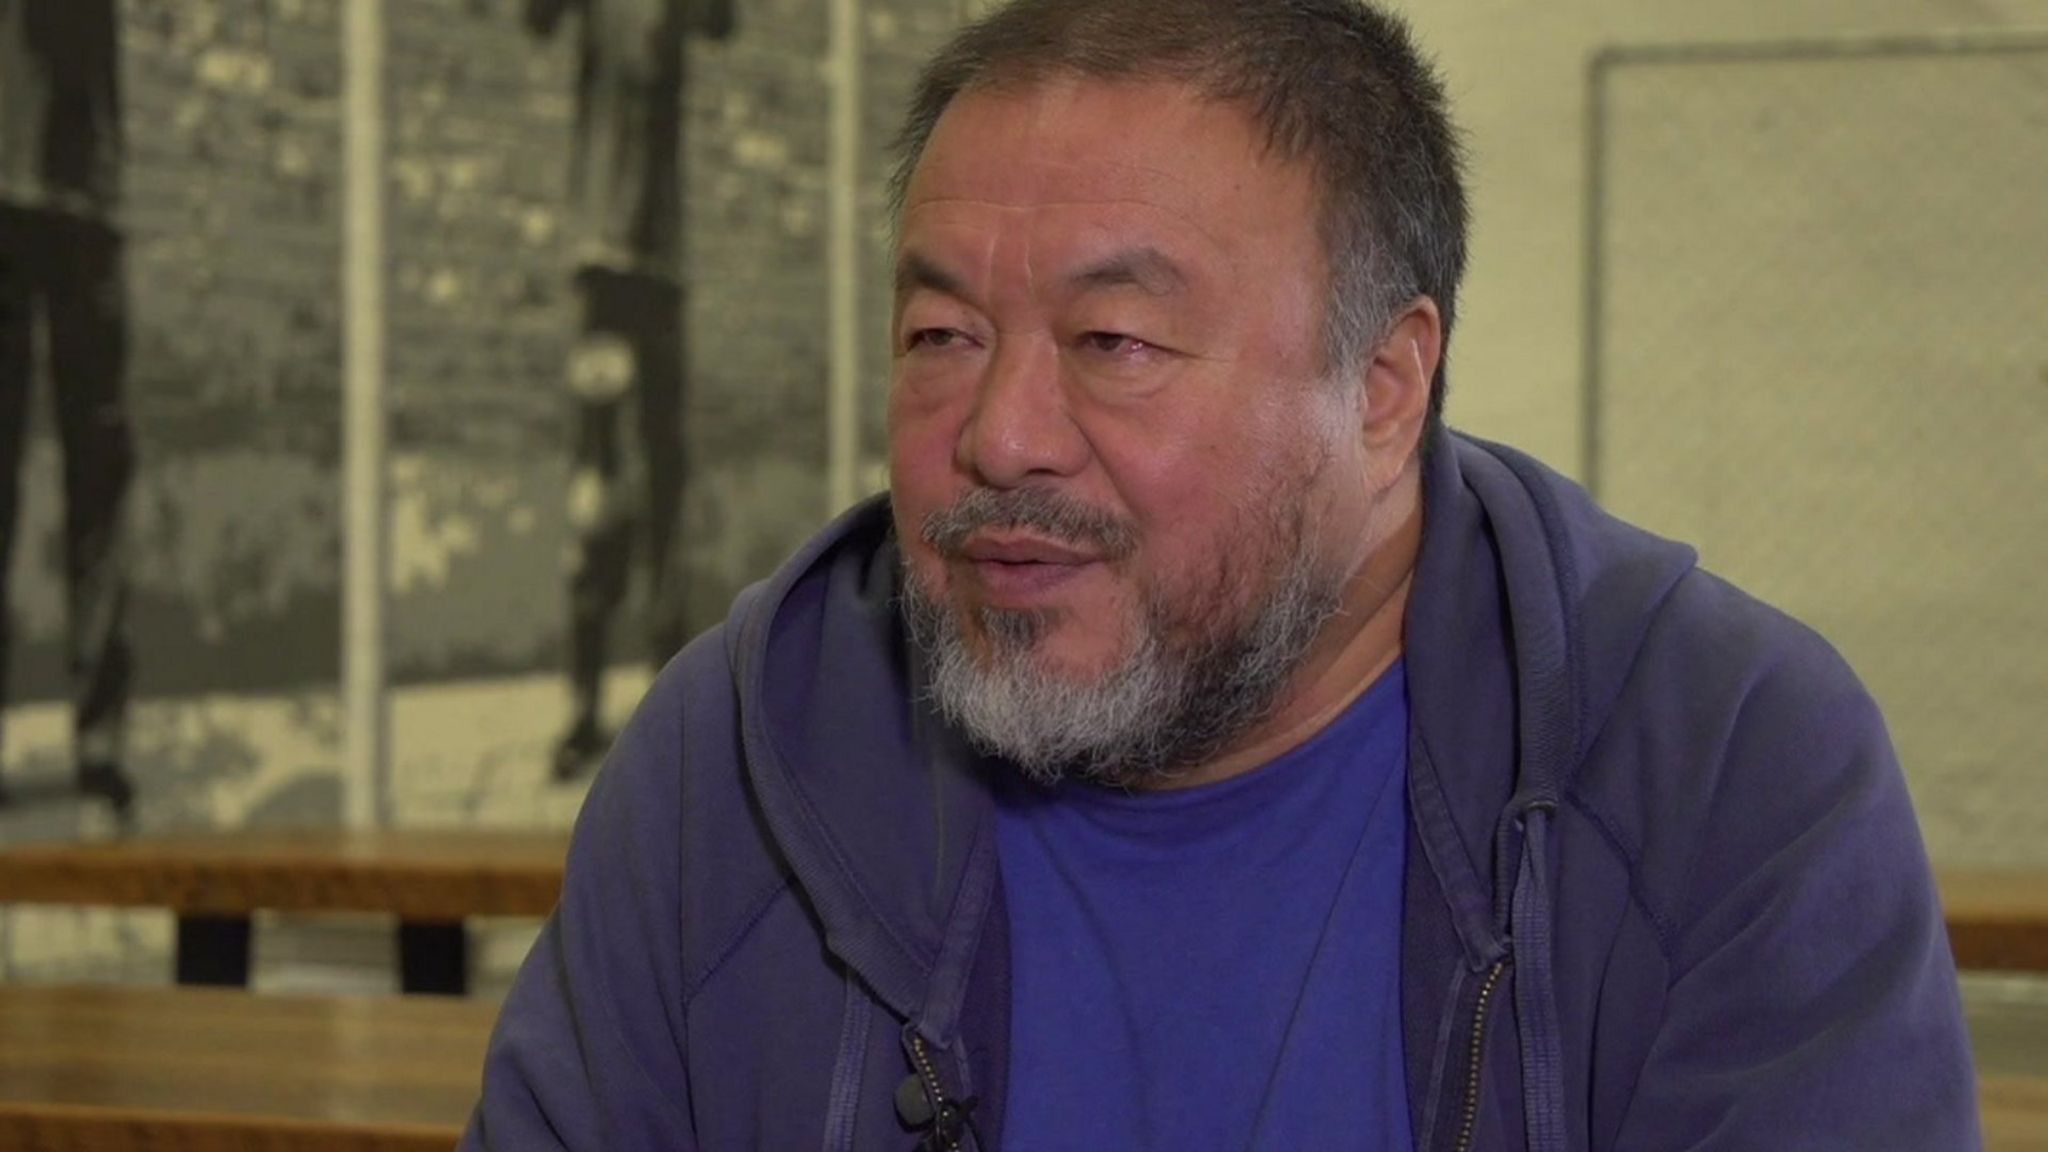 Chinese dissident and activist Ai Weiwei